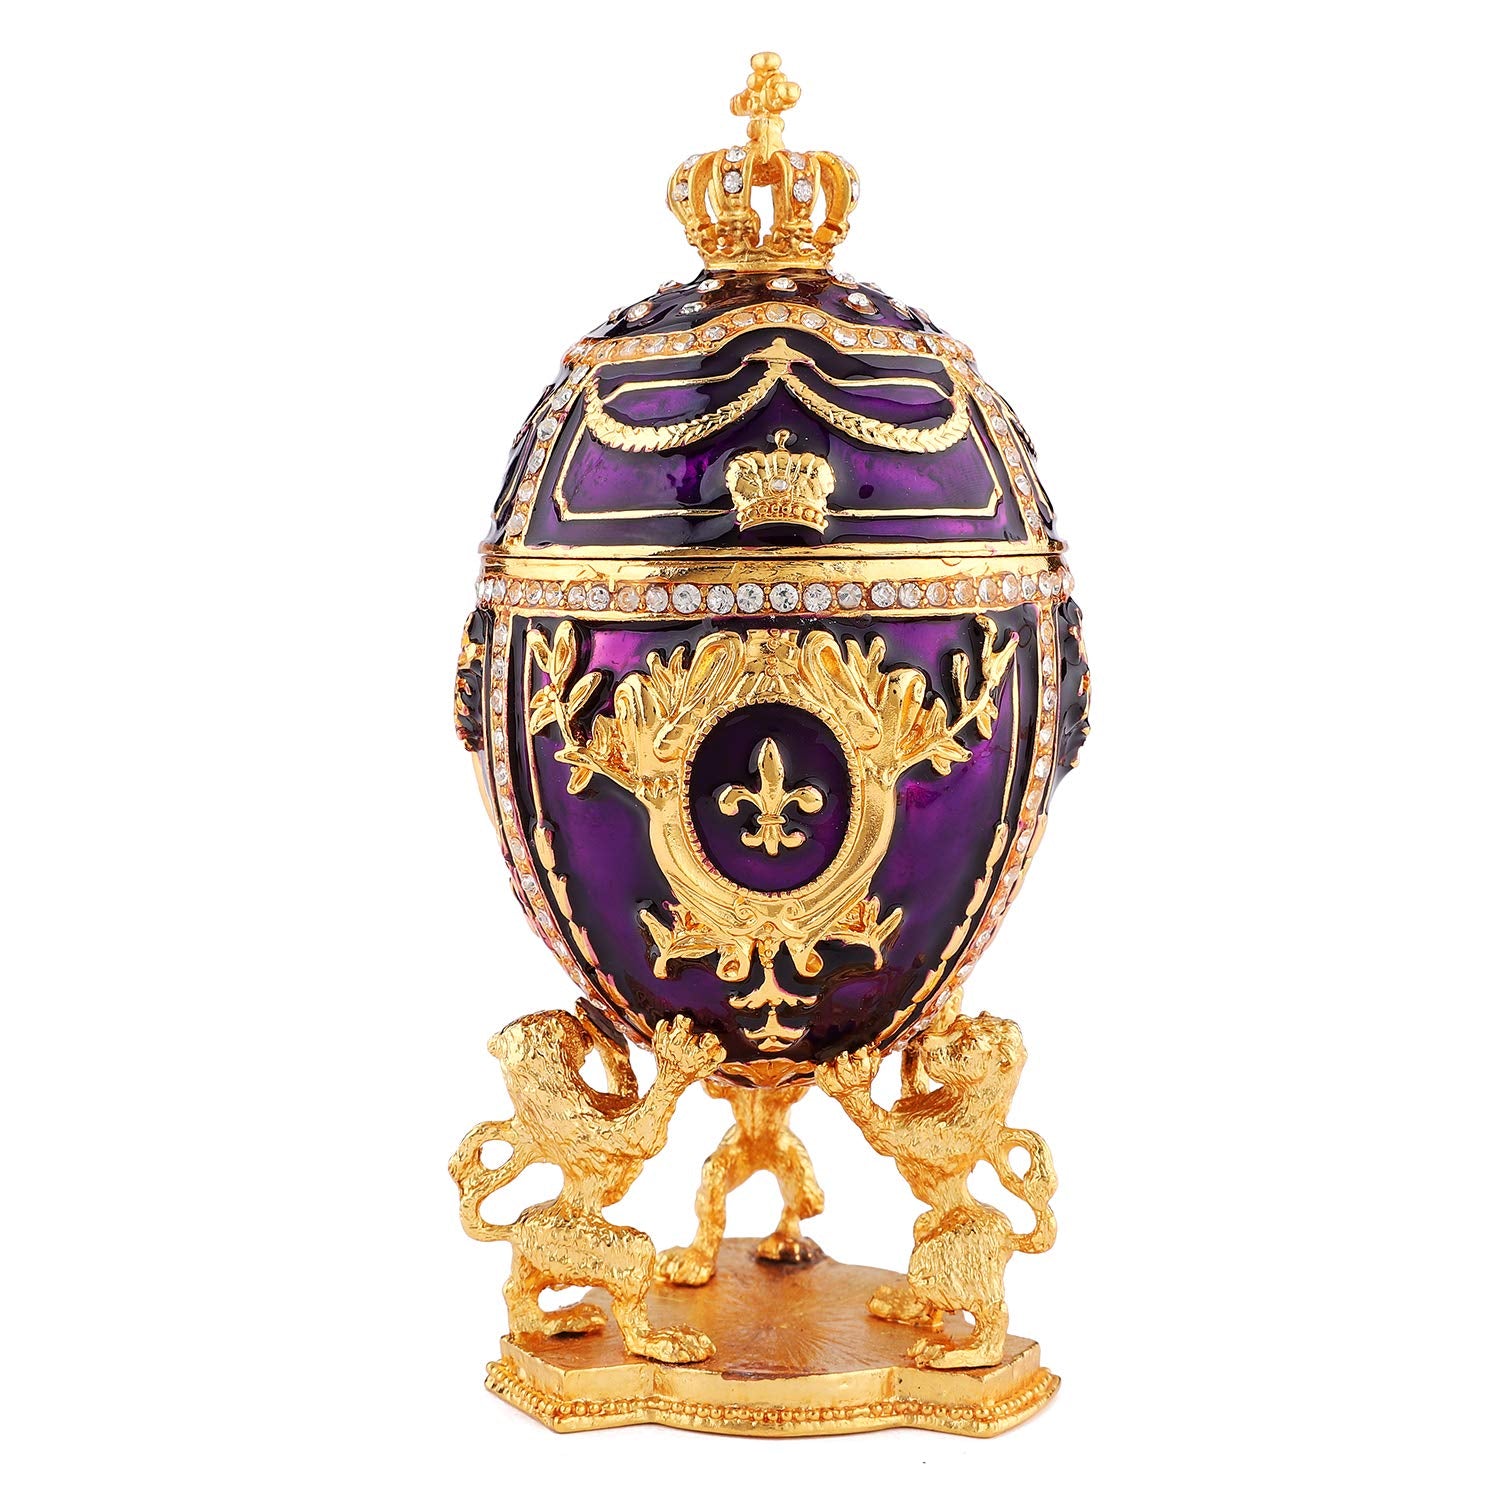 QIFU Vintage Hand Painted Faberge Egg Style Hinged Jewelry Trinket Box with Rich Enamel and Sparkling Rhinestones, Unique Gift Home Decor, Best Ornament Your Collection